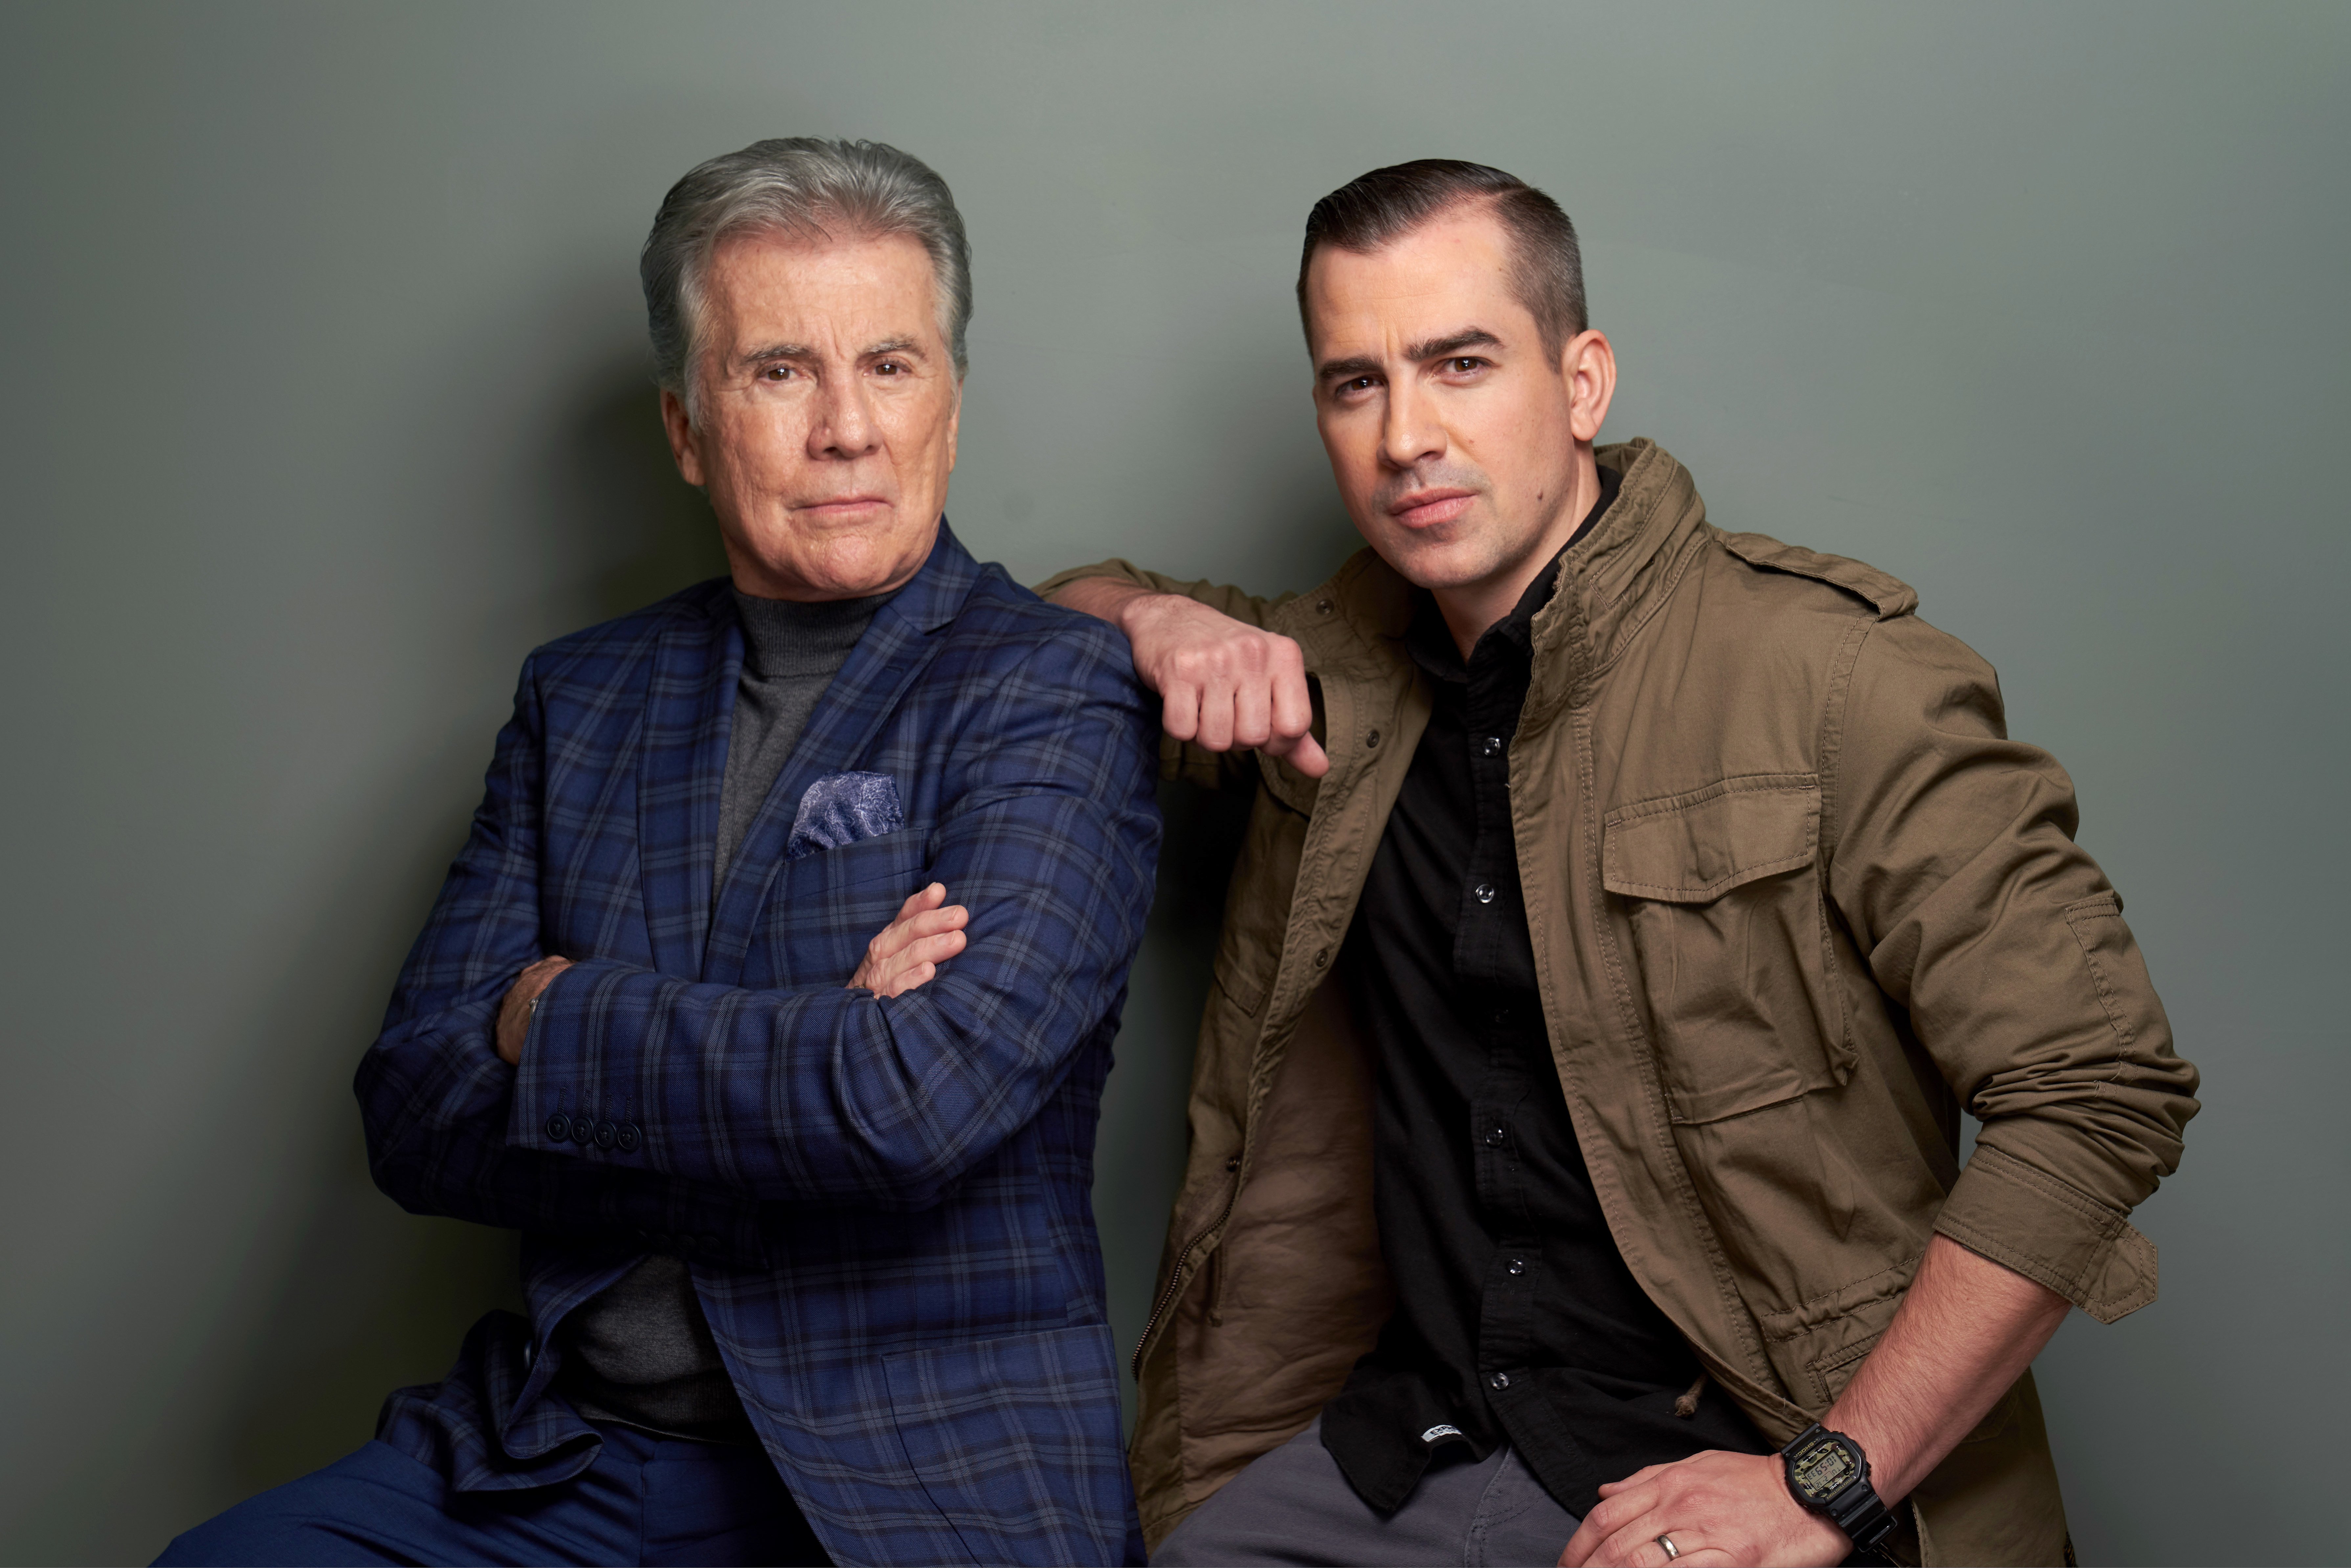 John Walsh (L) and Callahan Walsh of Investigation Discovery's 'In Pursuit With John Walsh' pose for a portrait during the 2019 Winter TCA at The Langham Huntington, Pasadena, on February 12, 2019, in Pasadena, California. | Source: Getty Images